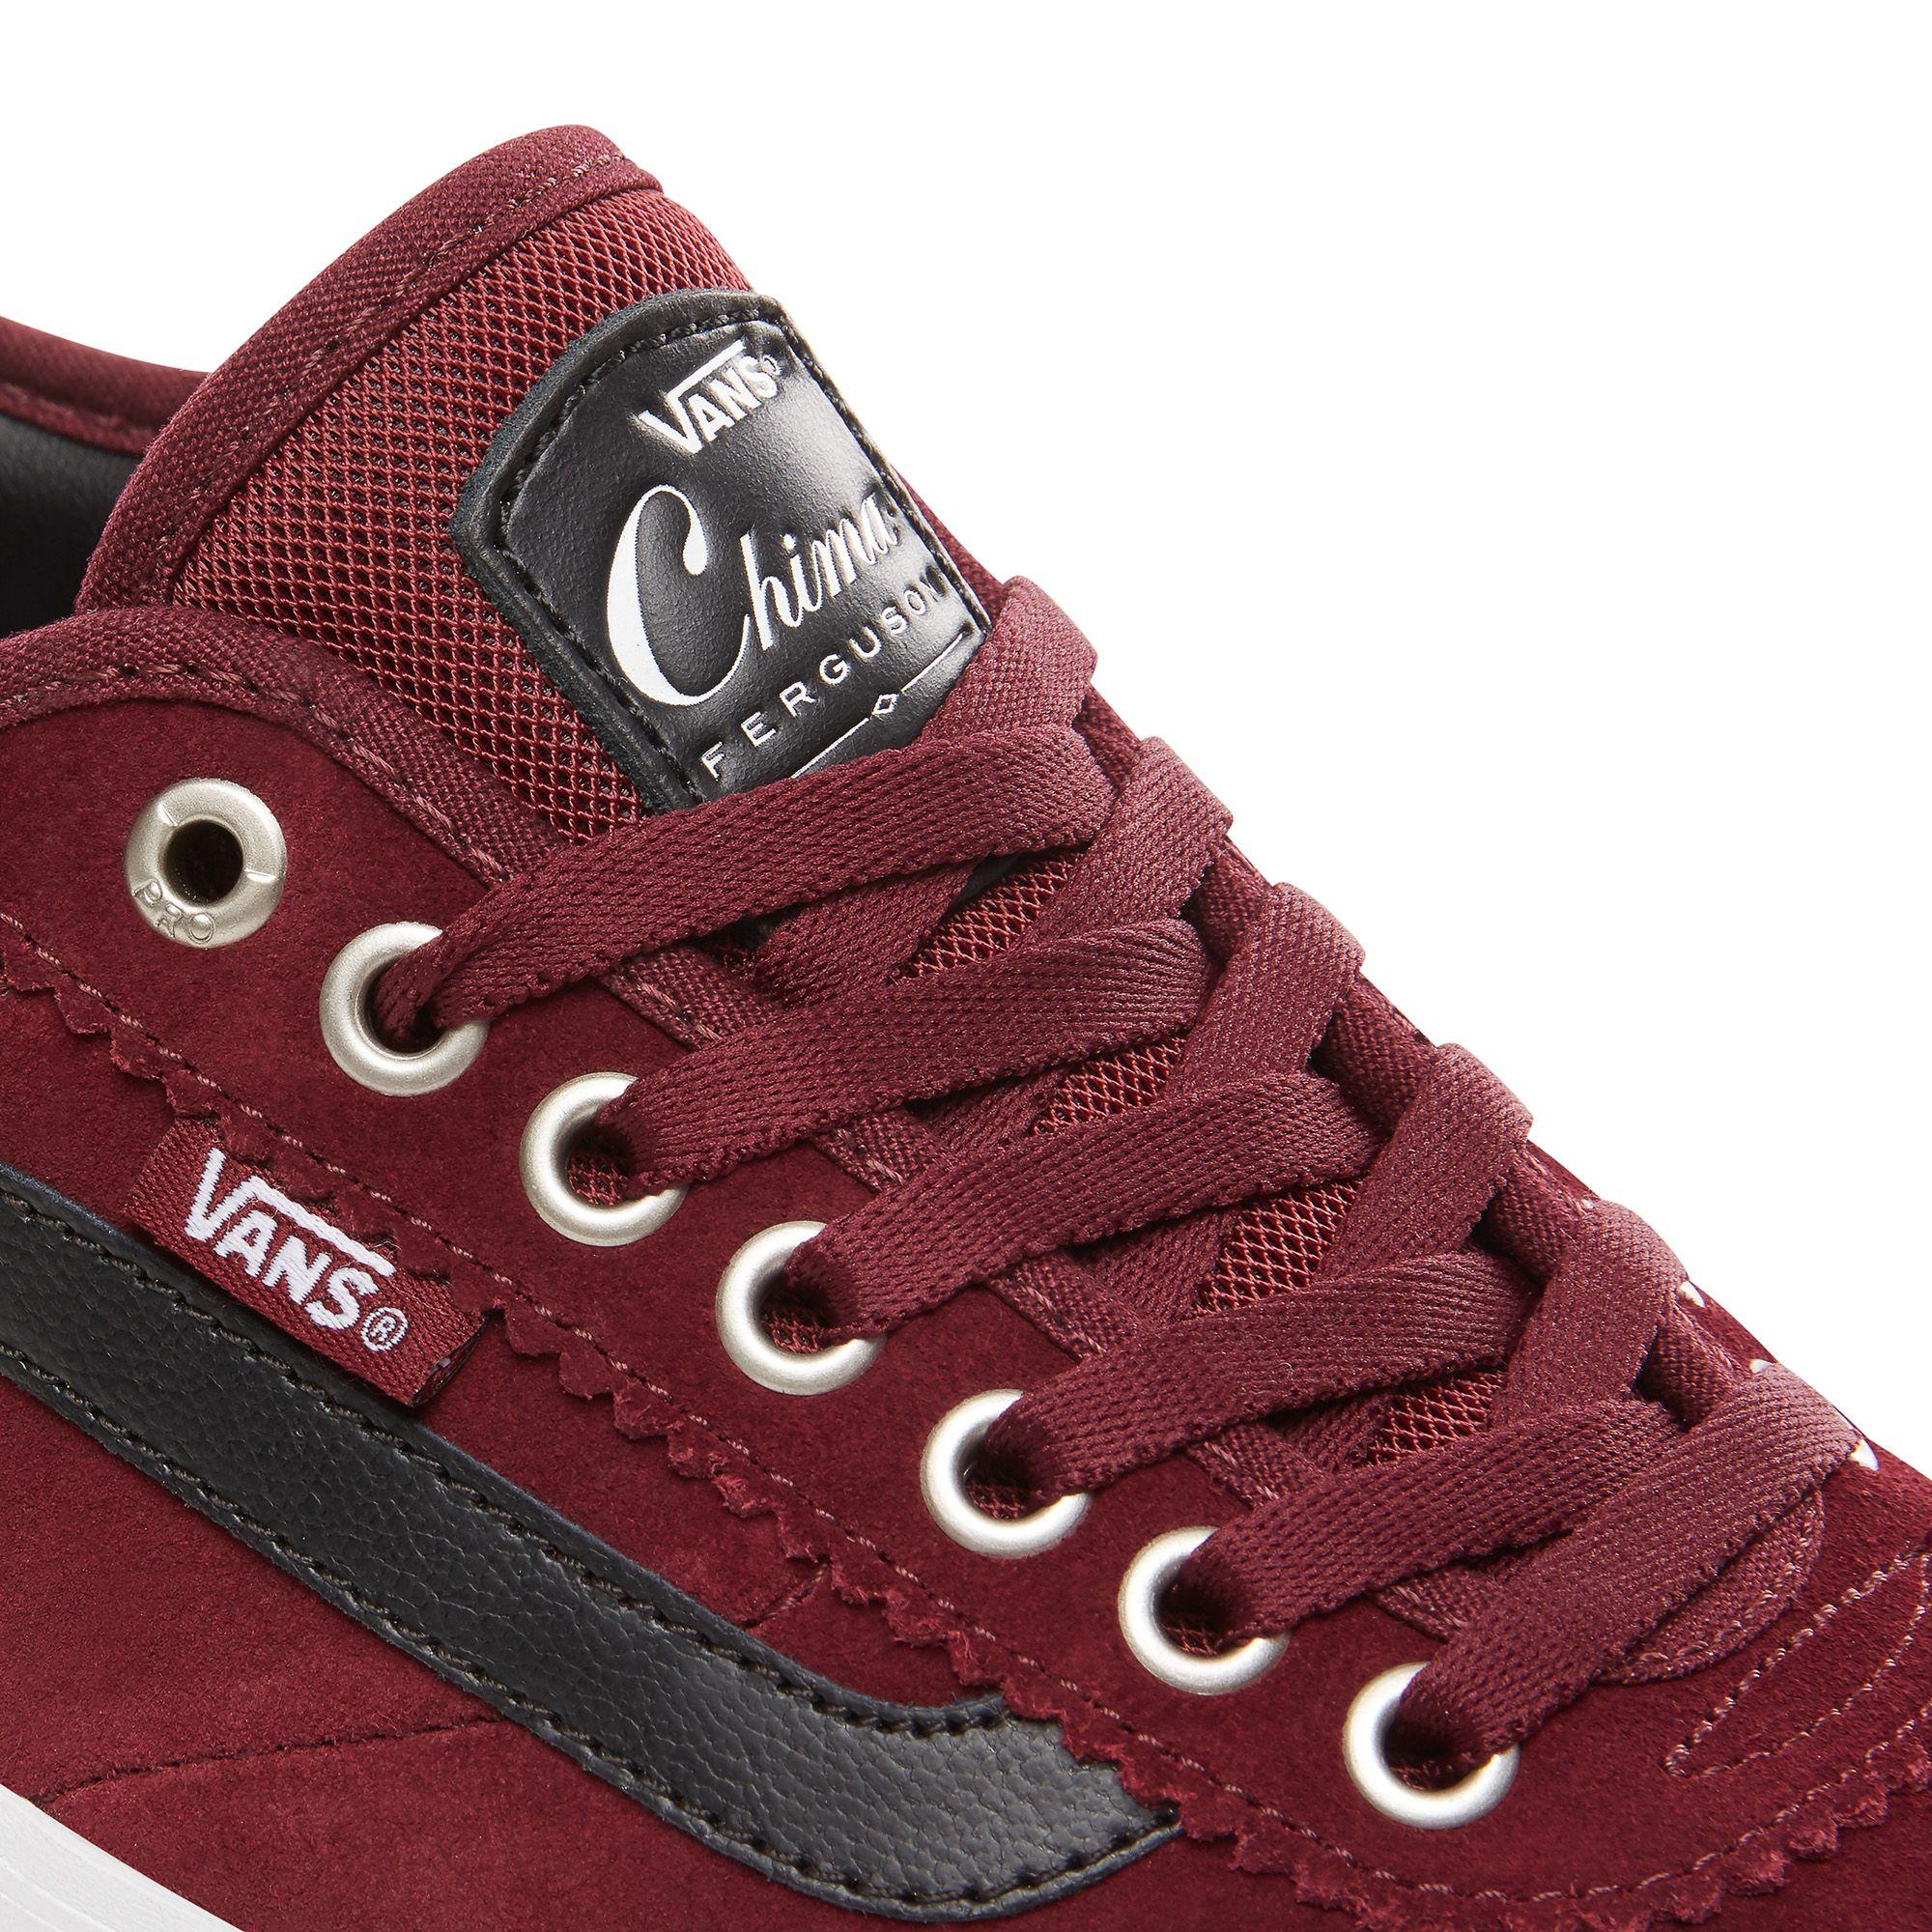 Vans Canvas Chima Pro 2 in Black (Red) - Lyst